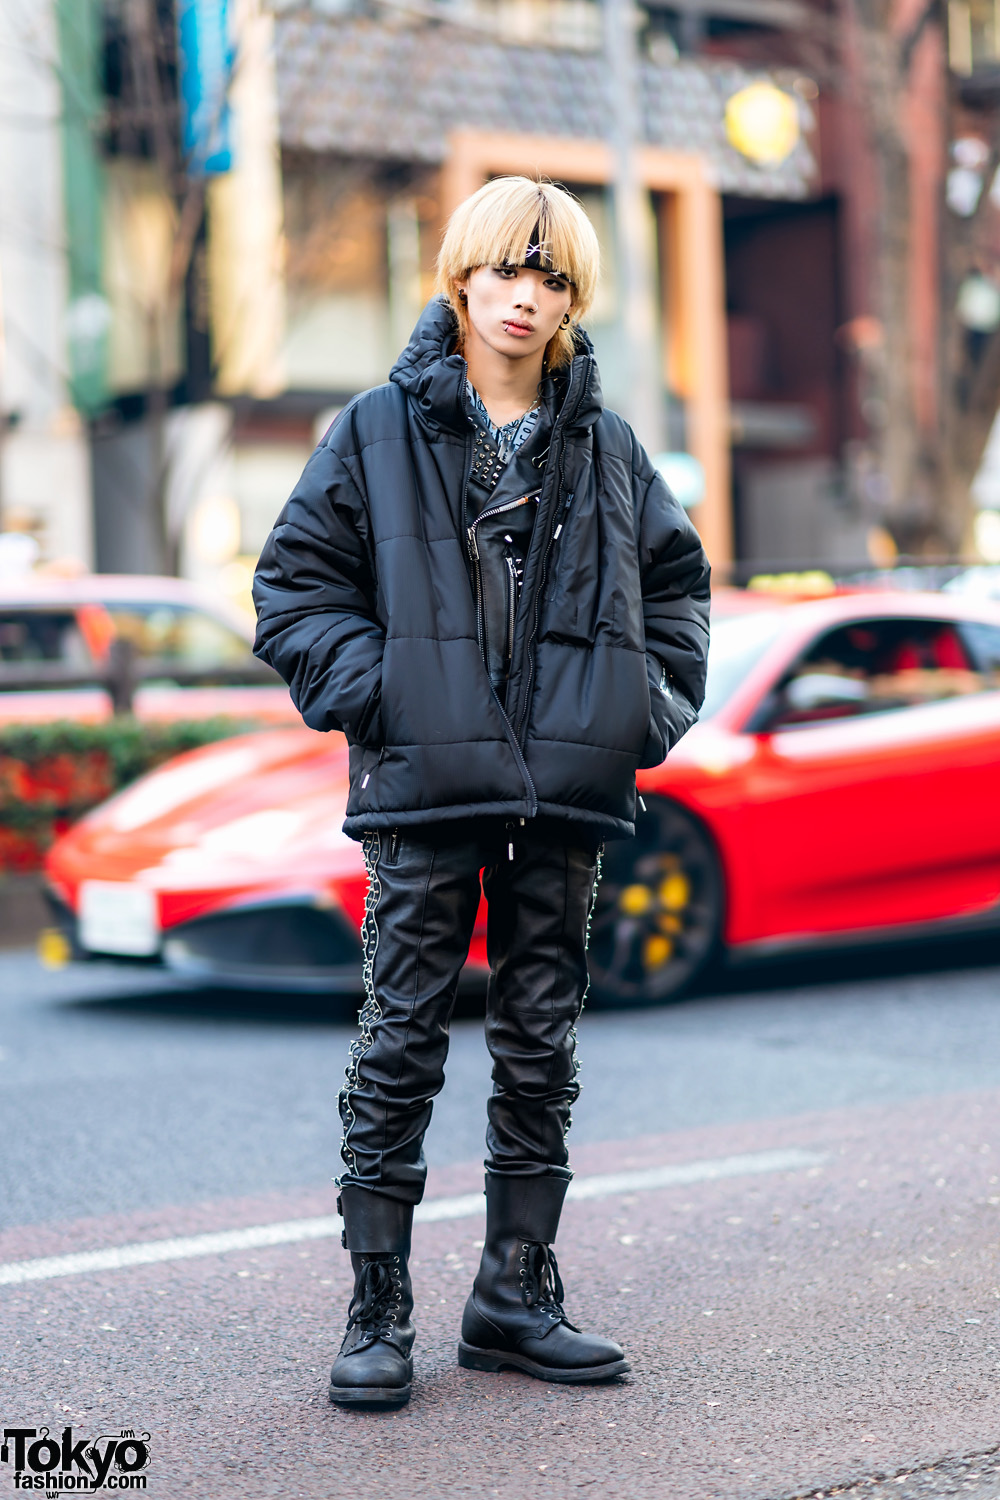 All Black 99%IS- Street Style w/ Blond Hair, Studded Leather Jacket, Leather Pants, Puffer Jacket & Vintage Boots